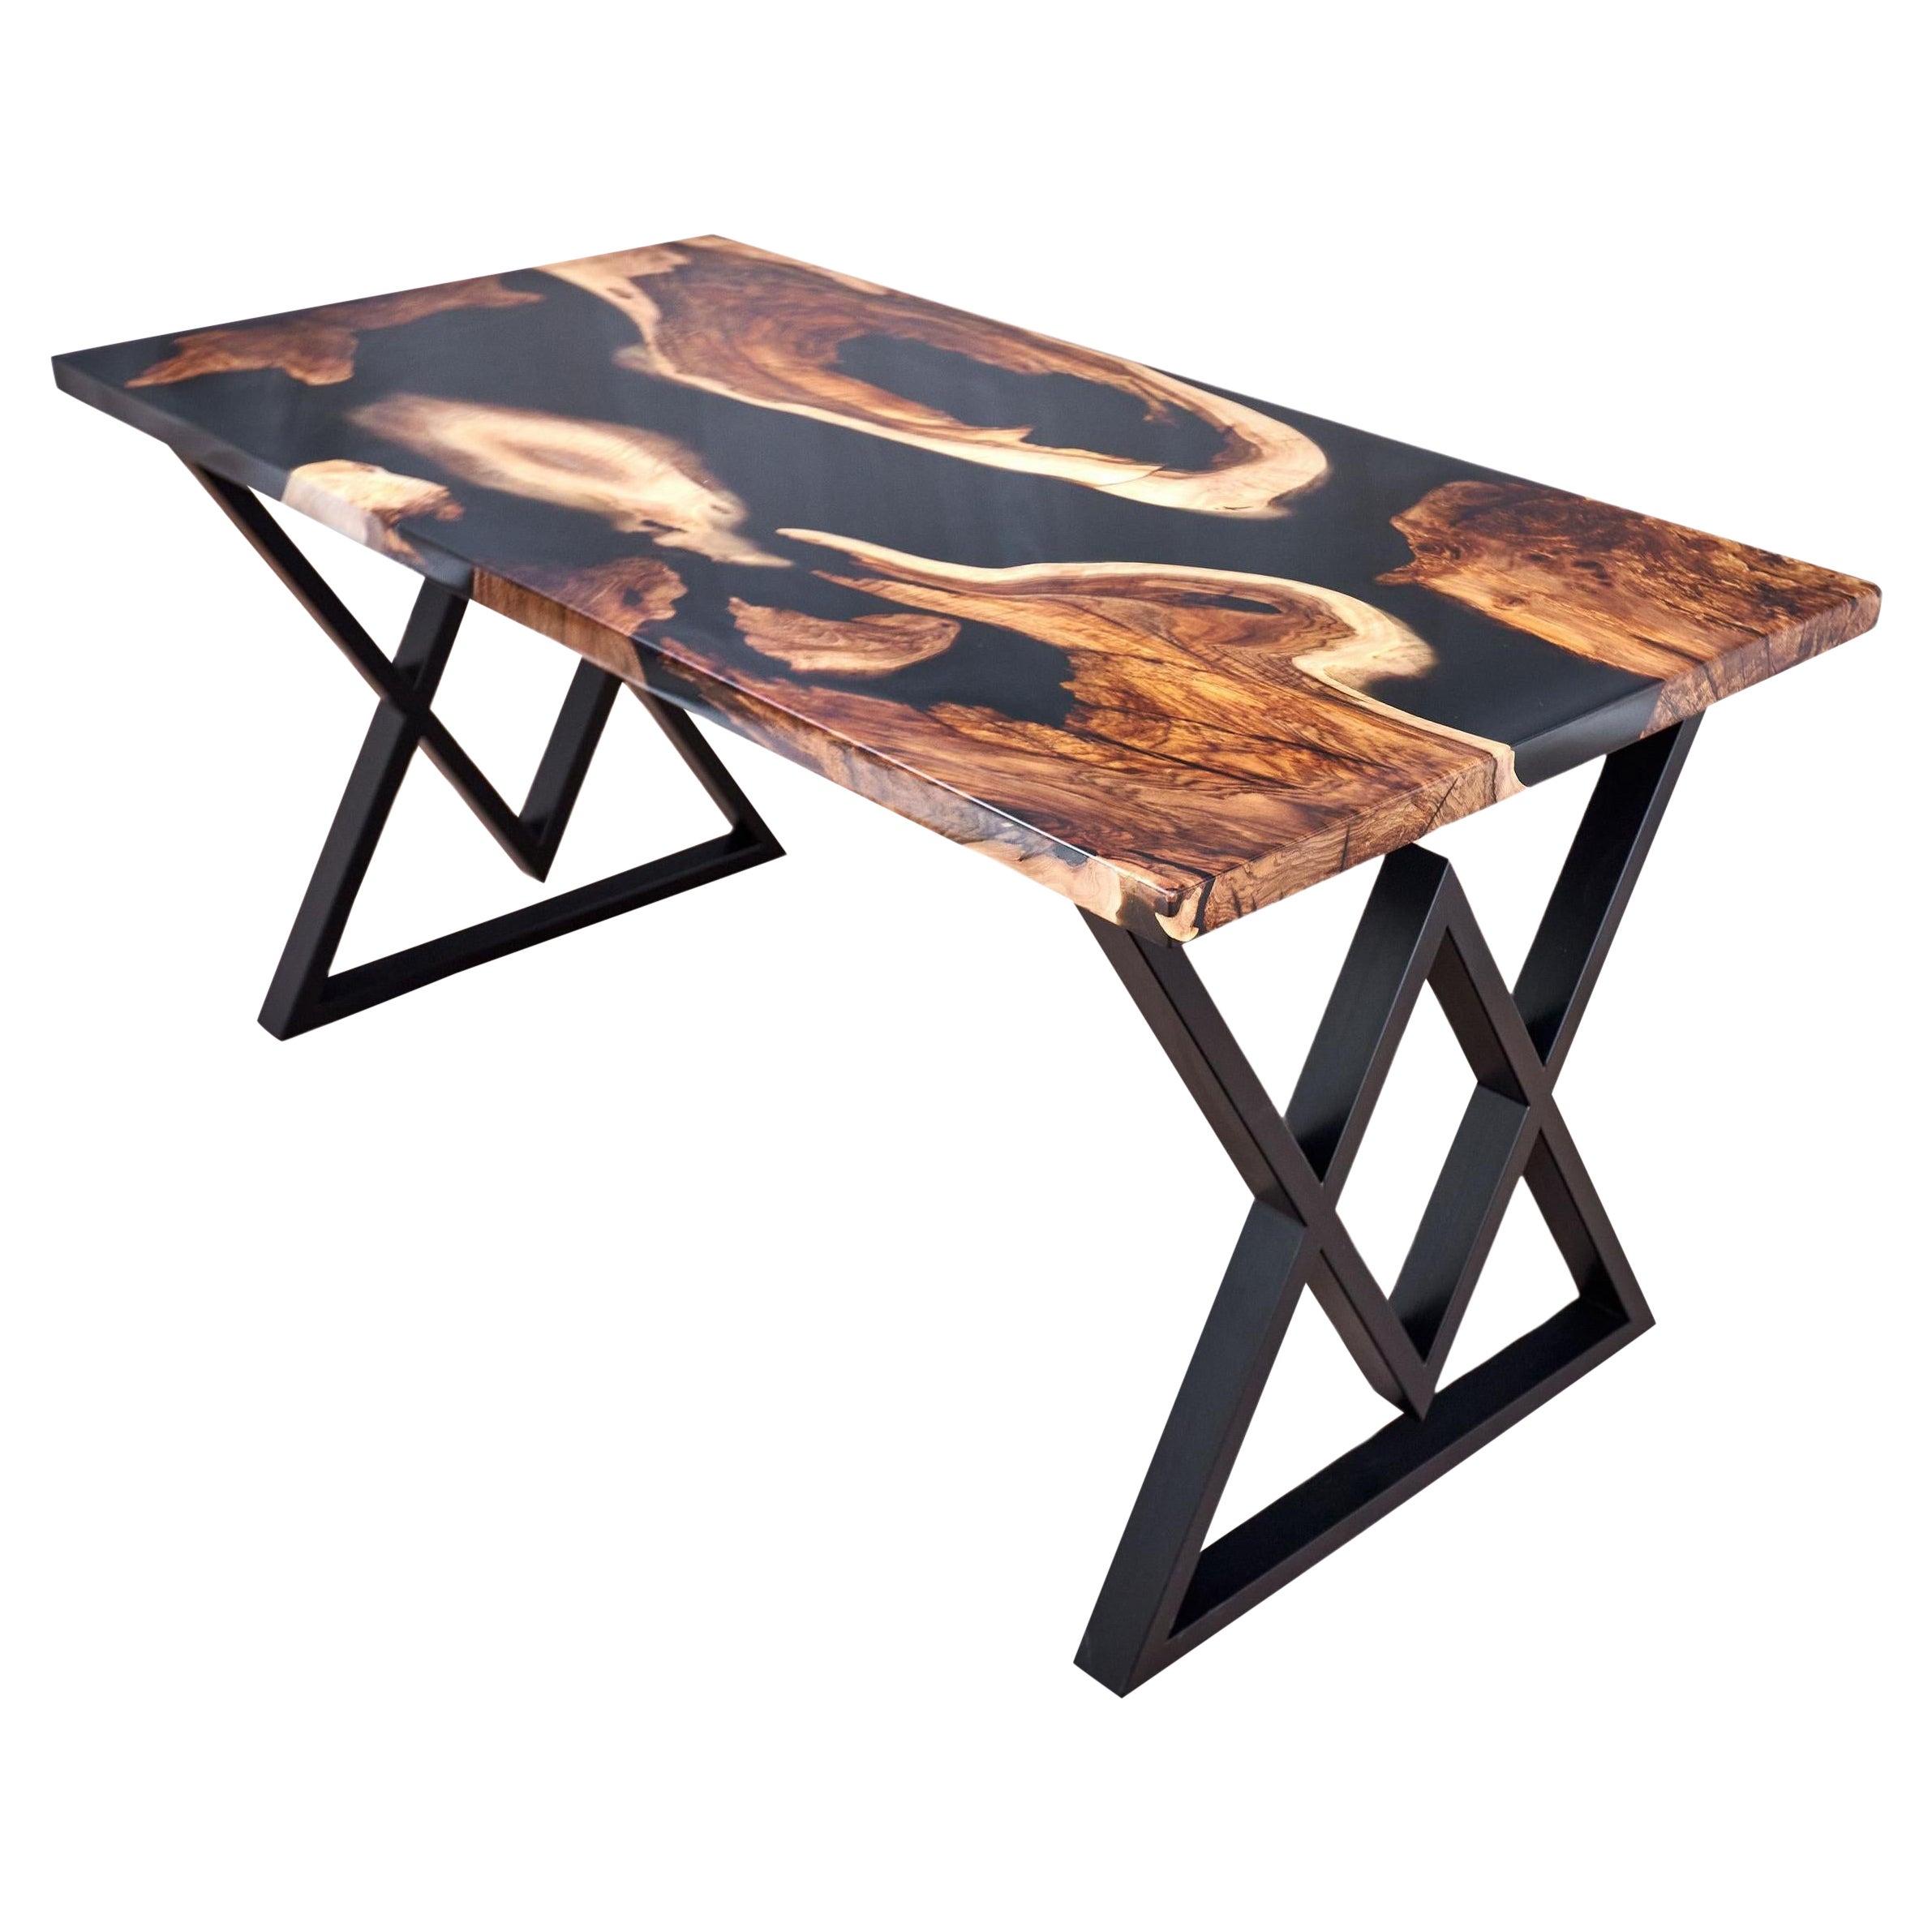 Midcentury Modern Dining Table Contemporary Dining Table Handmade Rustic Tables For Sale